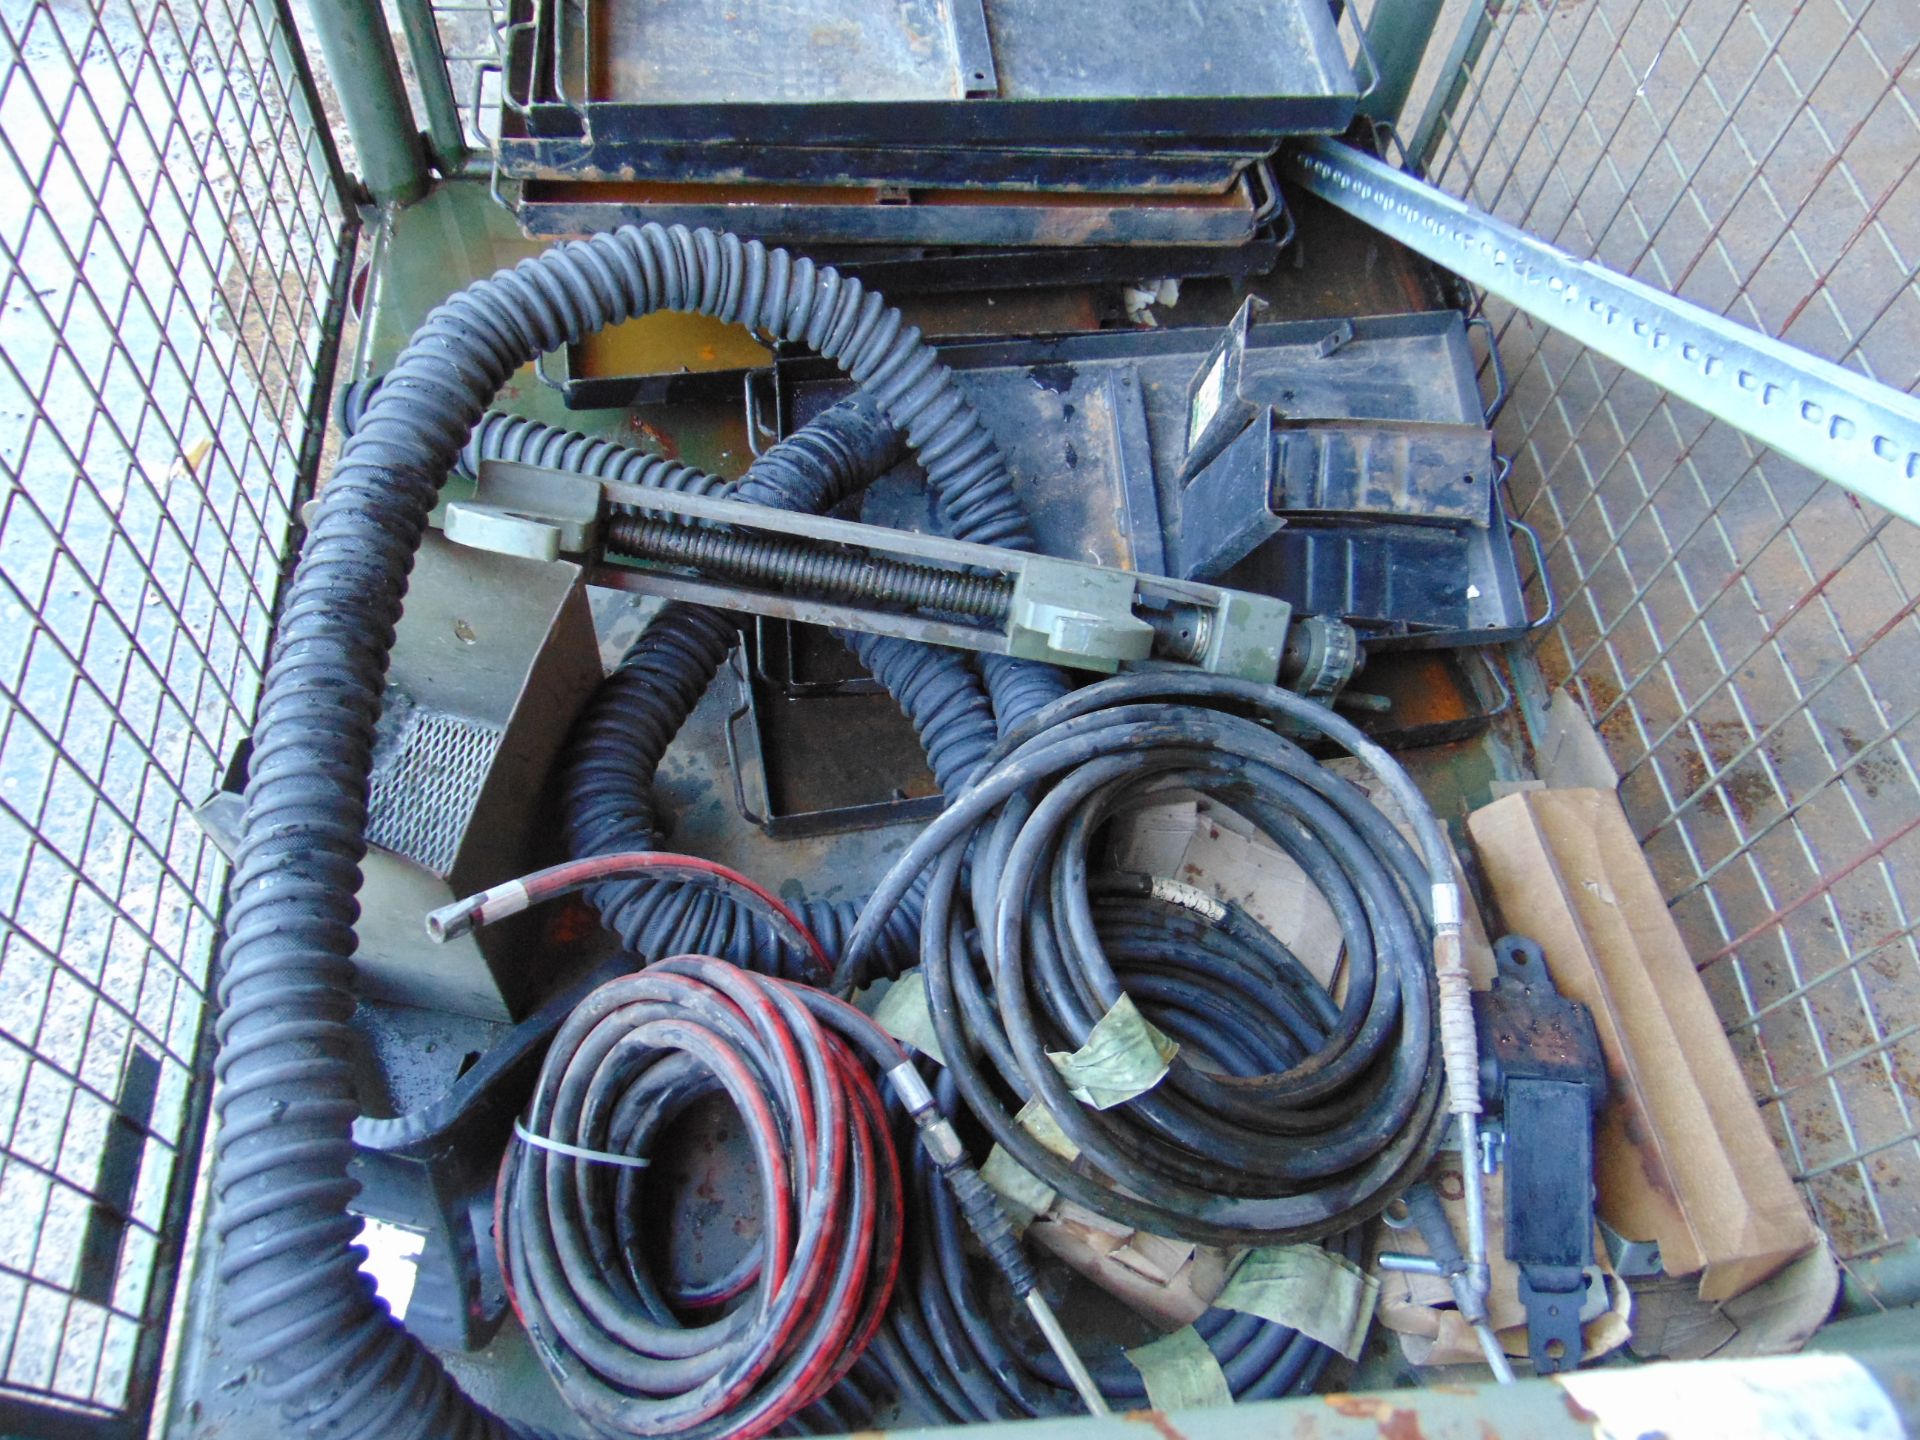 1 x Stillage of Track Clamps, Air Lines, Land Rover Battery Trays, Weapon Tray etc - Image 5 of 8